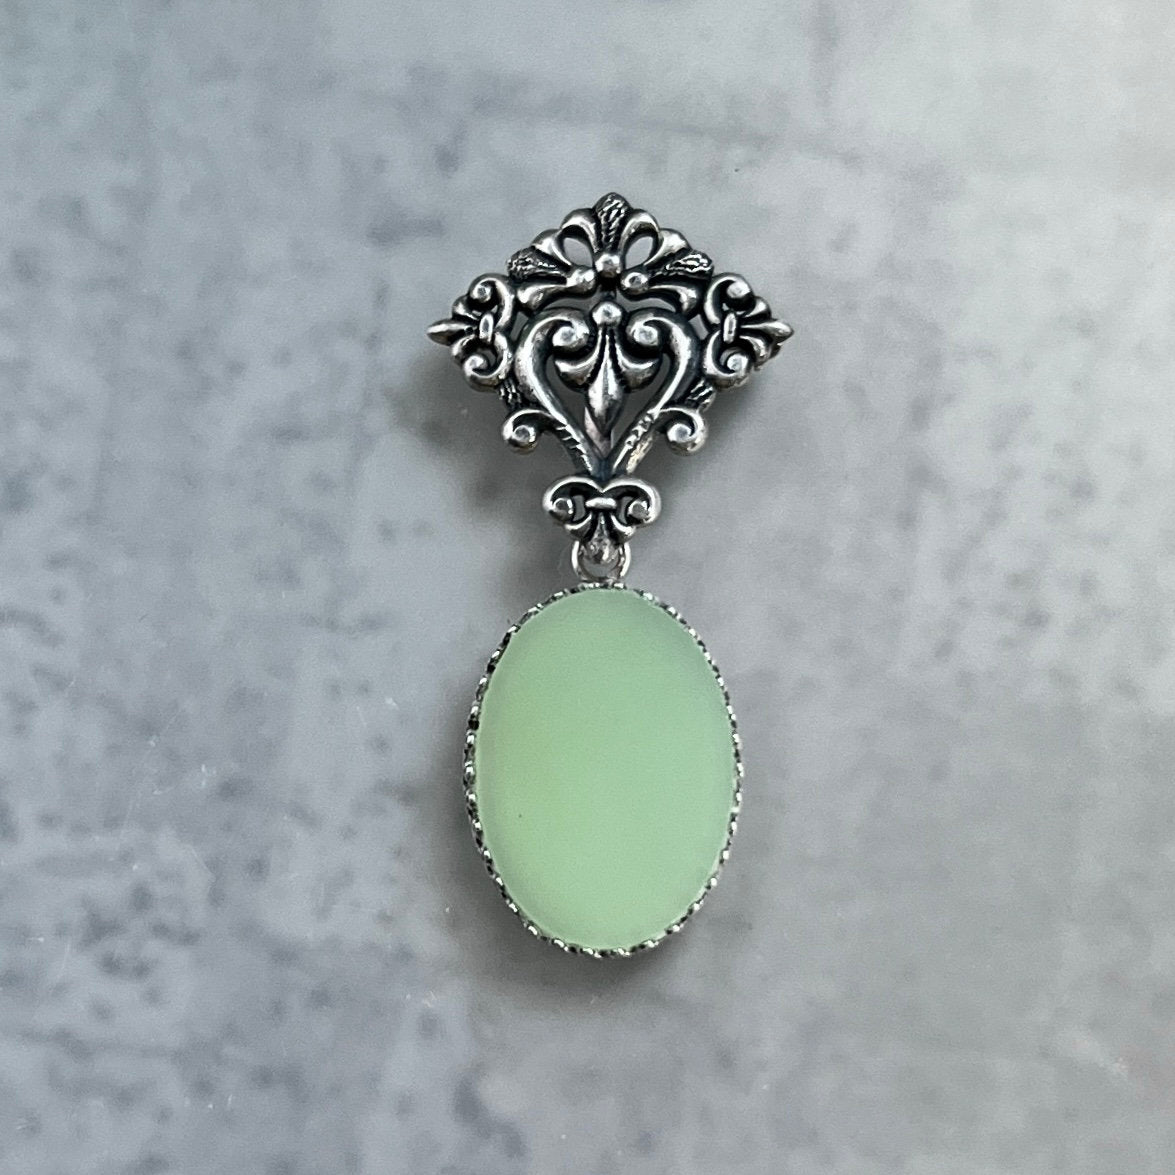 Victorian Brooch, Sterling Silver Pin, Fire King Jadeite, Green Depression Glass